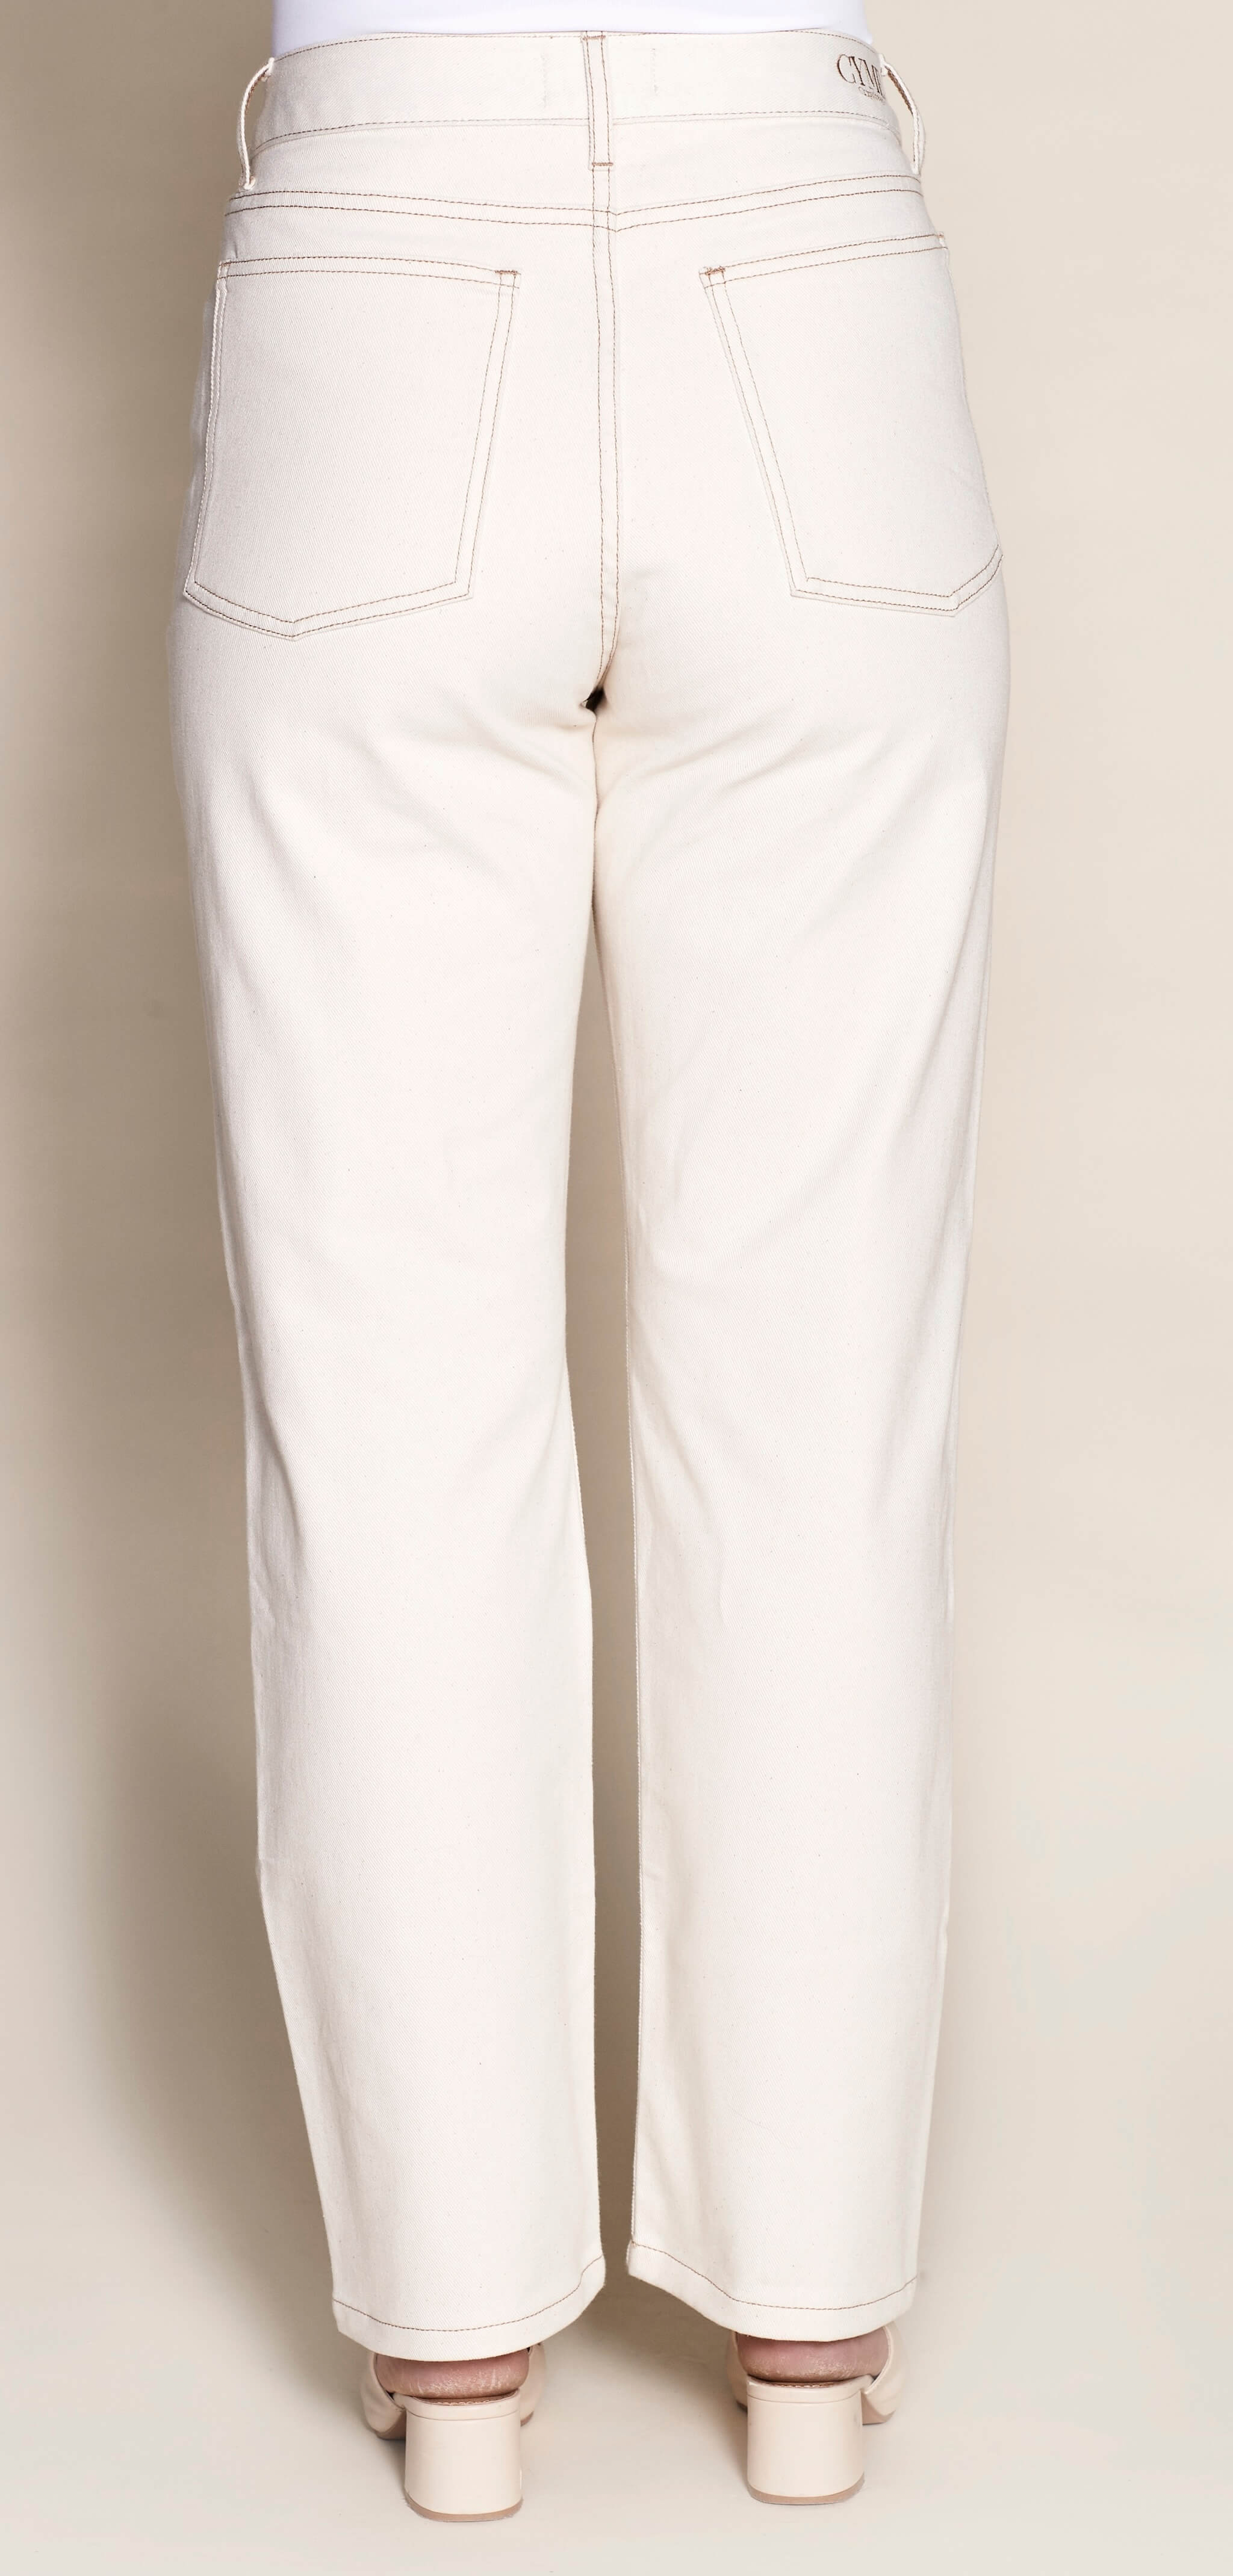 Rear view of Cyme Copenhagen's cream denim trousers, featuring a clean and classic design with signature branding on the waistband, showcasing the sustainable and chic Danish fashion ethos.